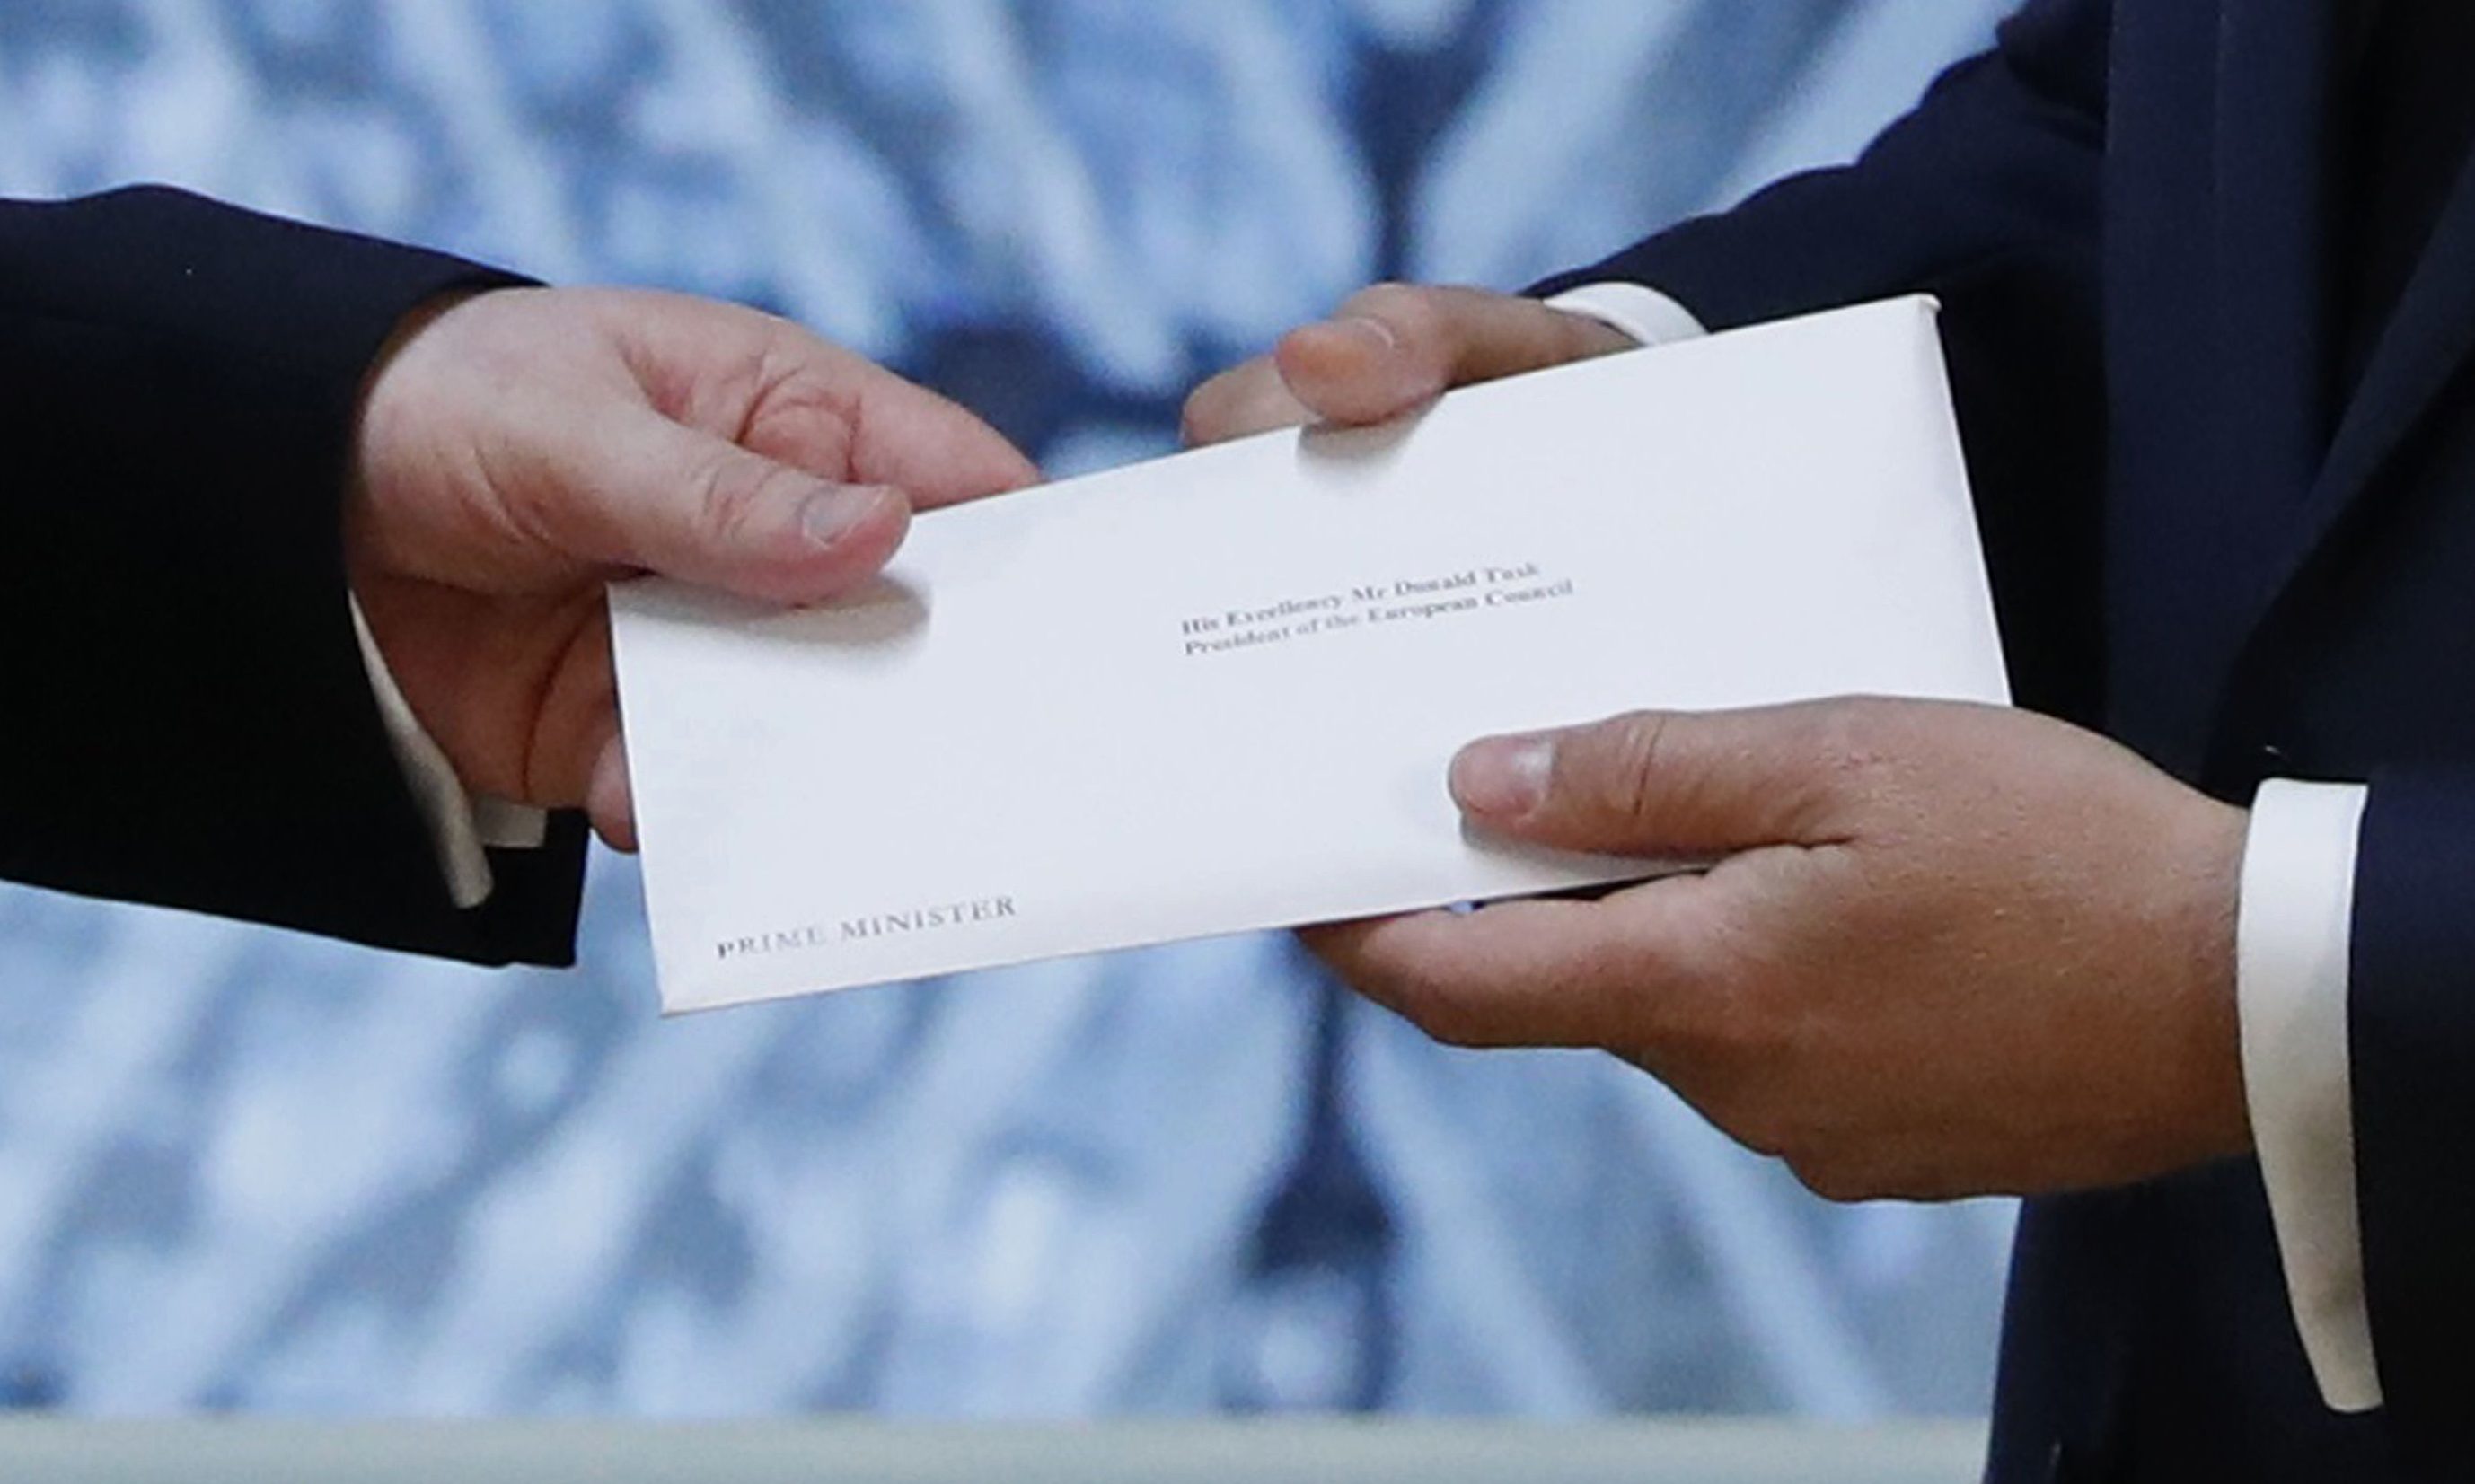 The letter that will formally trigger the beginning of Britain's exit from the European Union is handed over in Brussels.